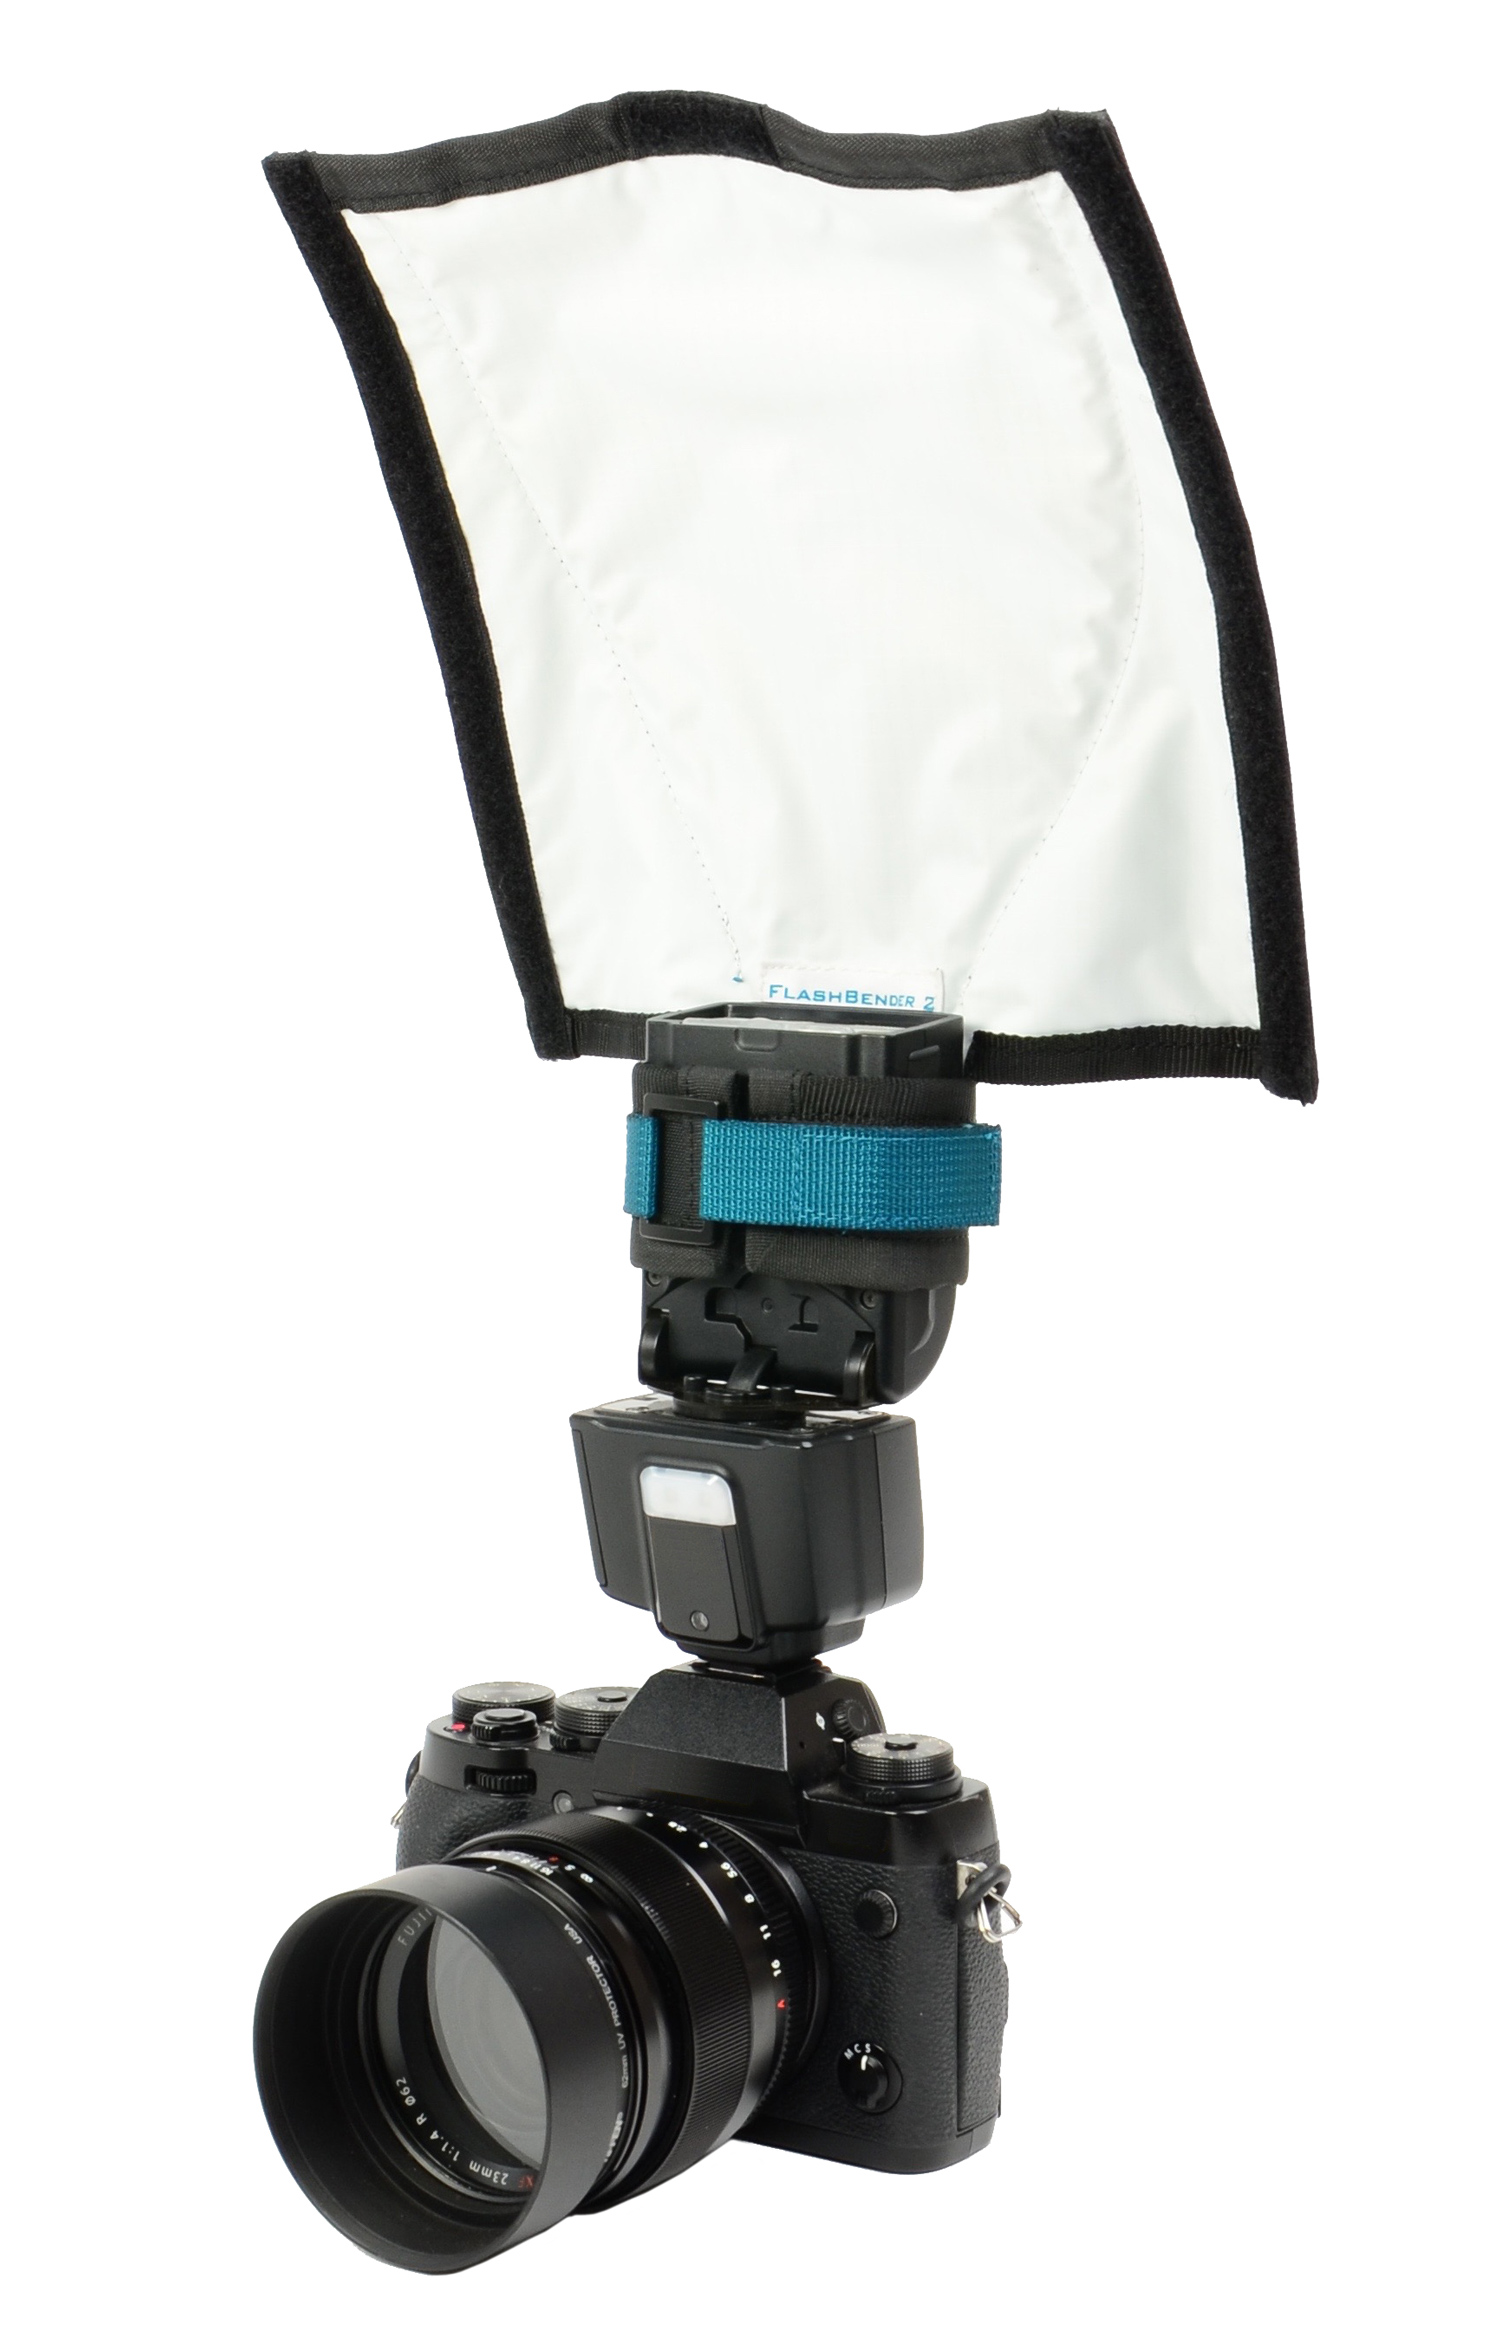 FlashBender 2 Mirrorless Soft Box Kit (shown with included shapeable reflector on Fuji X-T1)